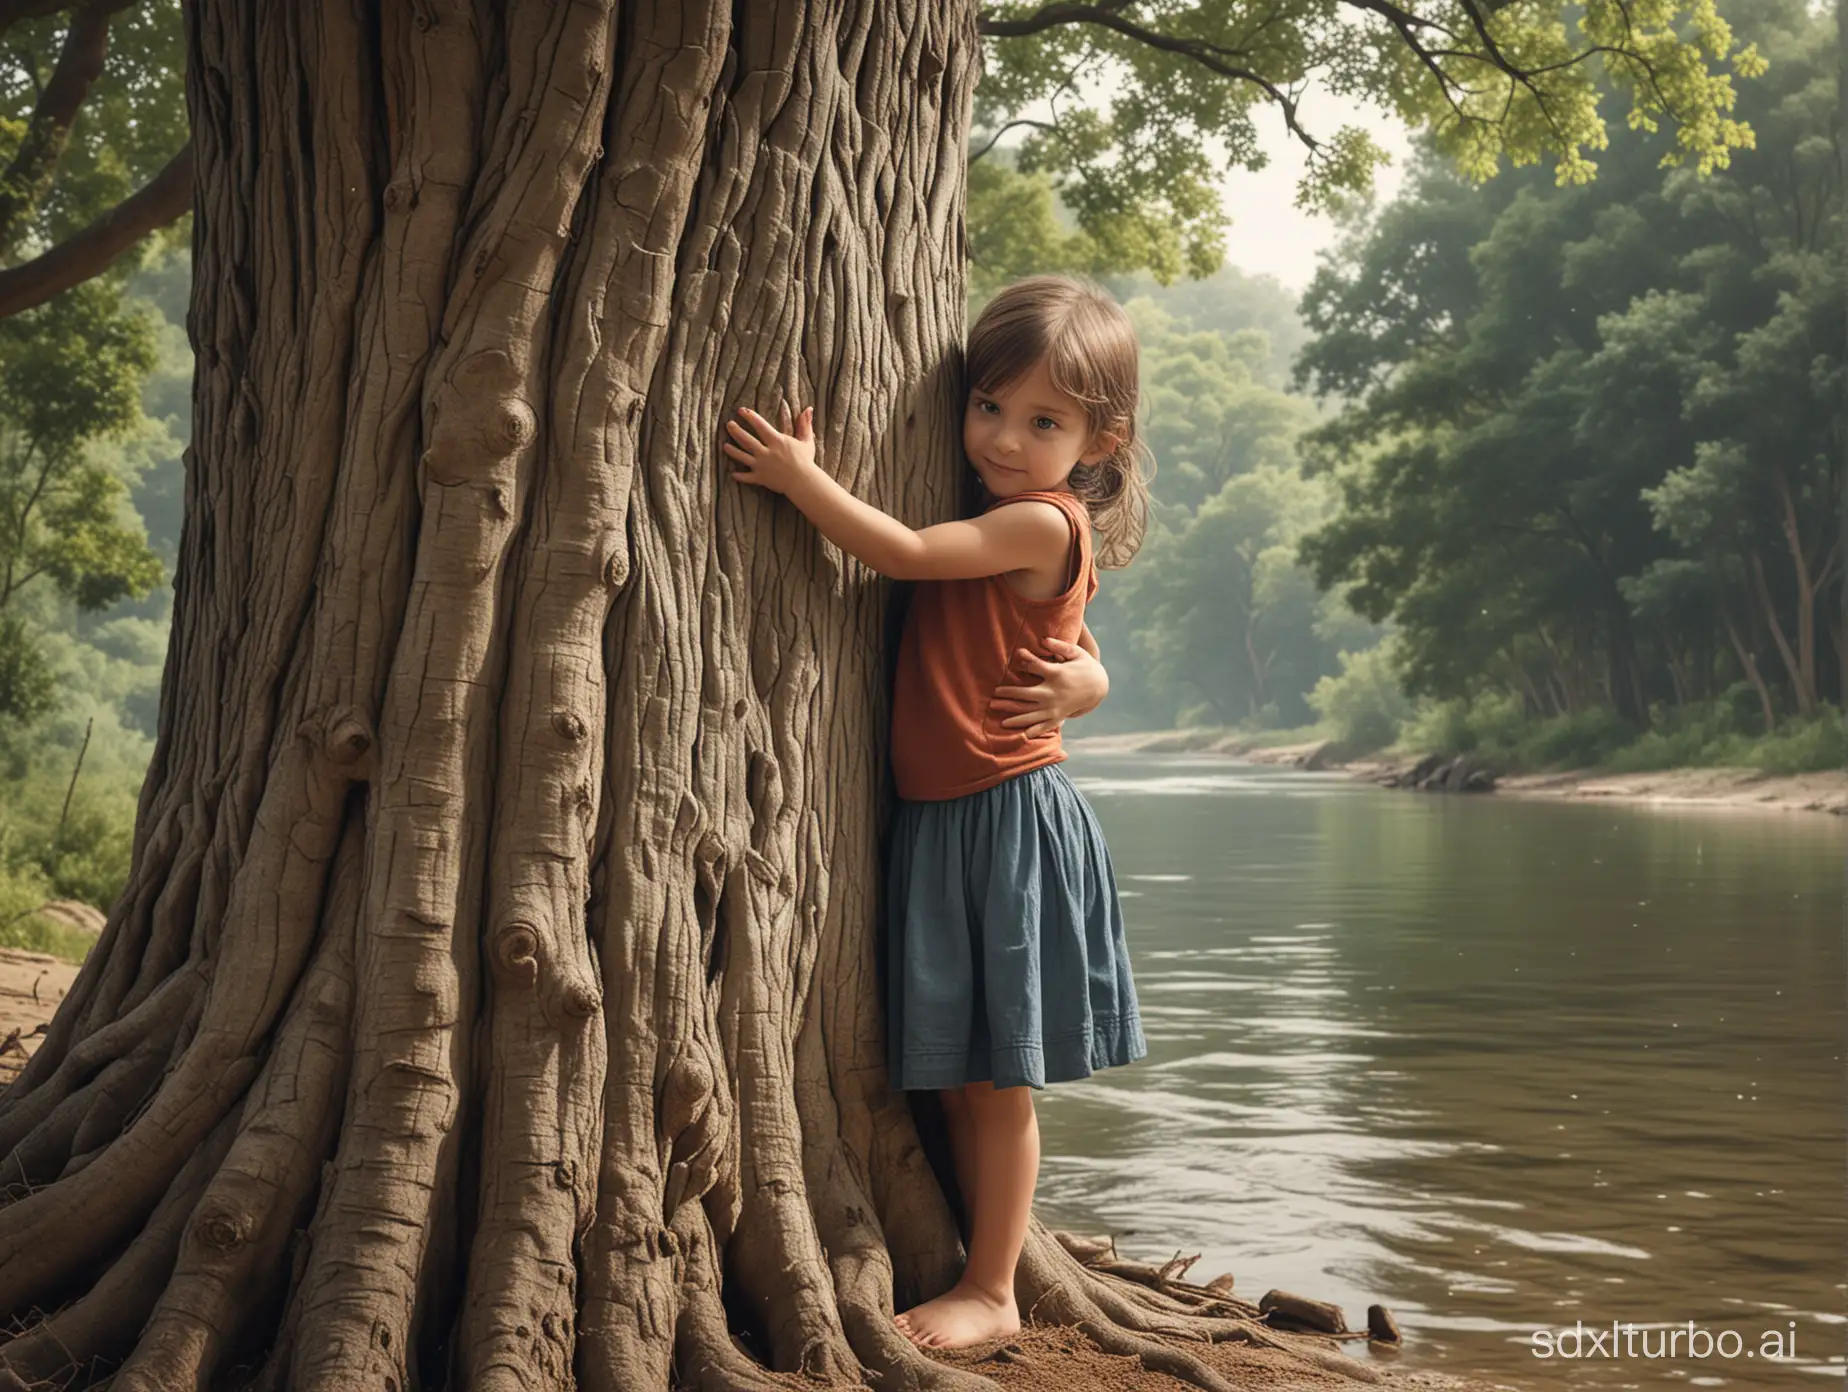 Create a hyper realistic picture of a child hugging a large tree near a river